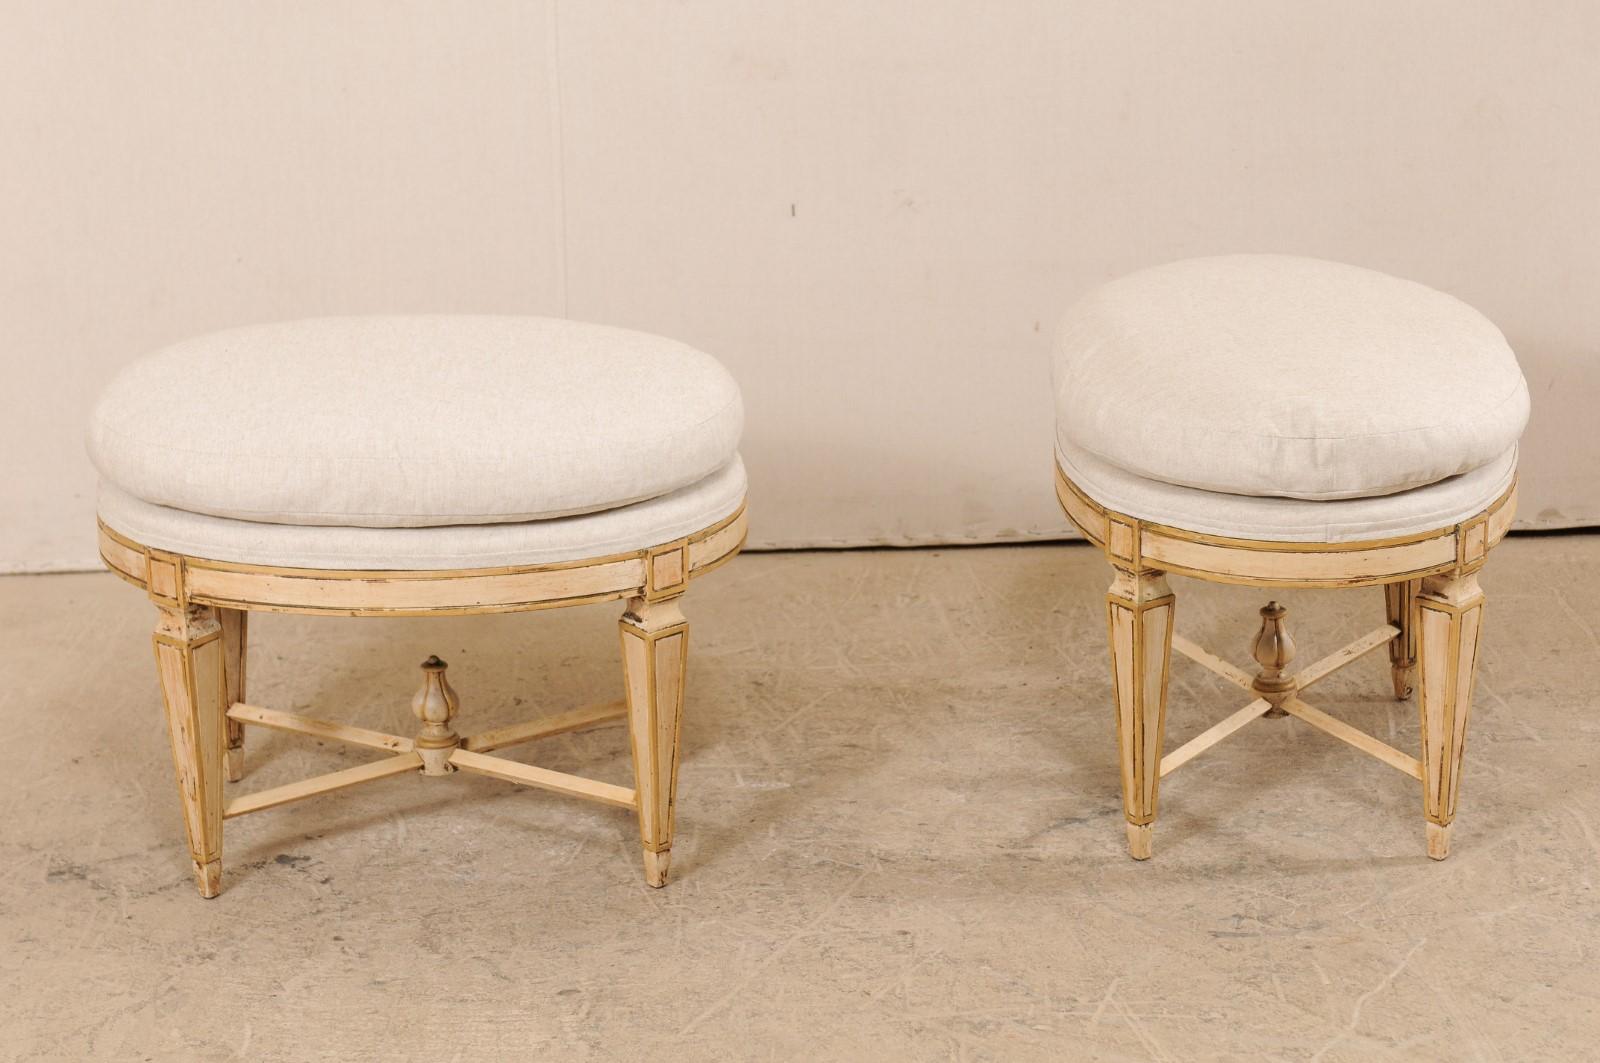 20th Century Pair of Italian Mid-Century Carved Wood Stools with Oval Shape